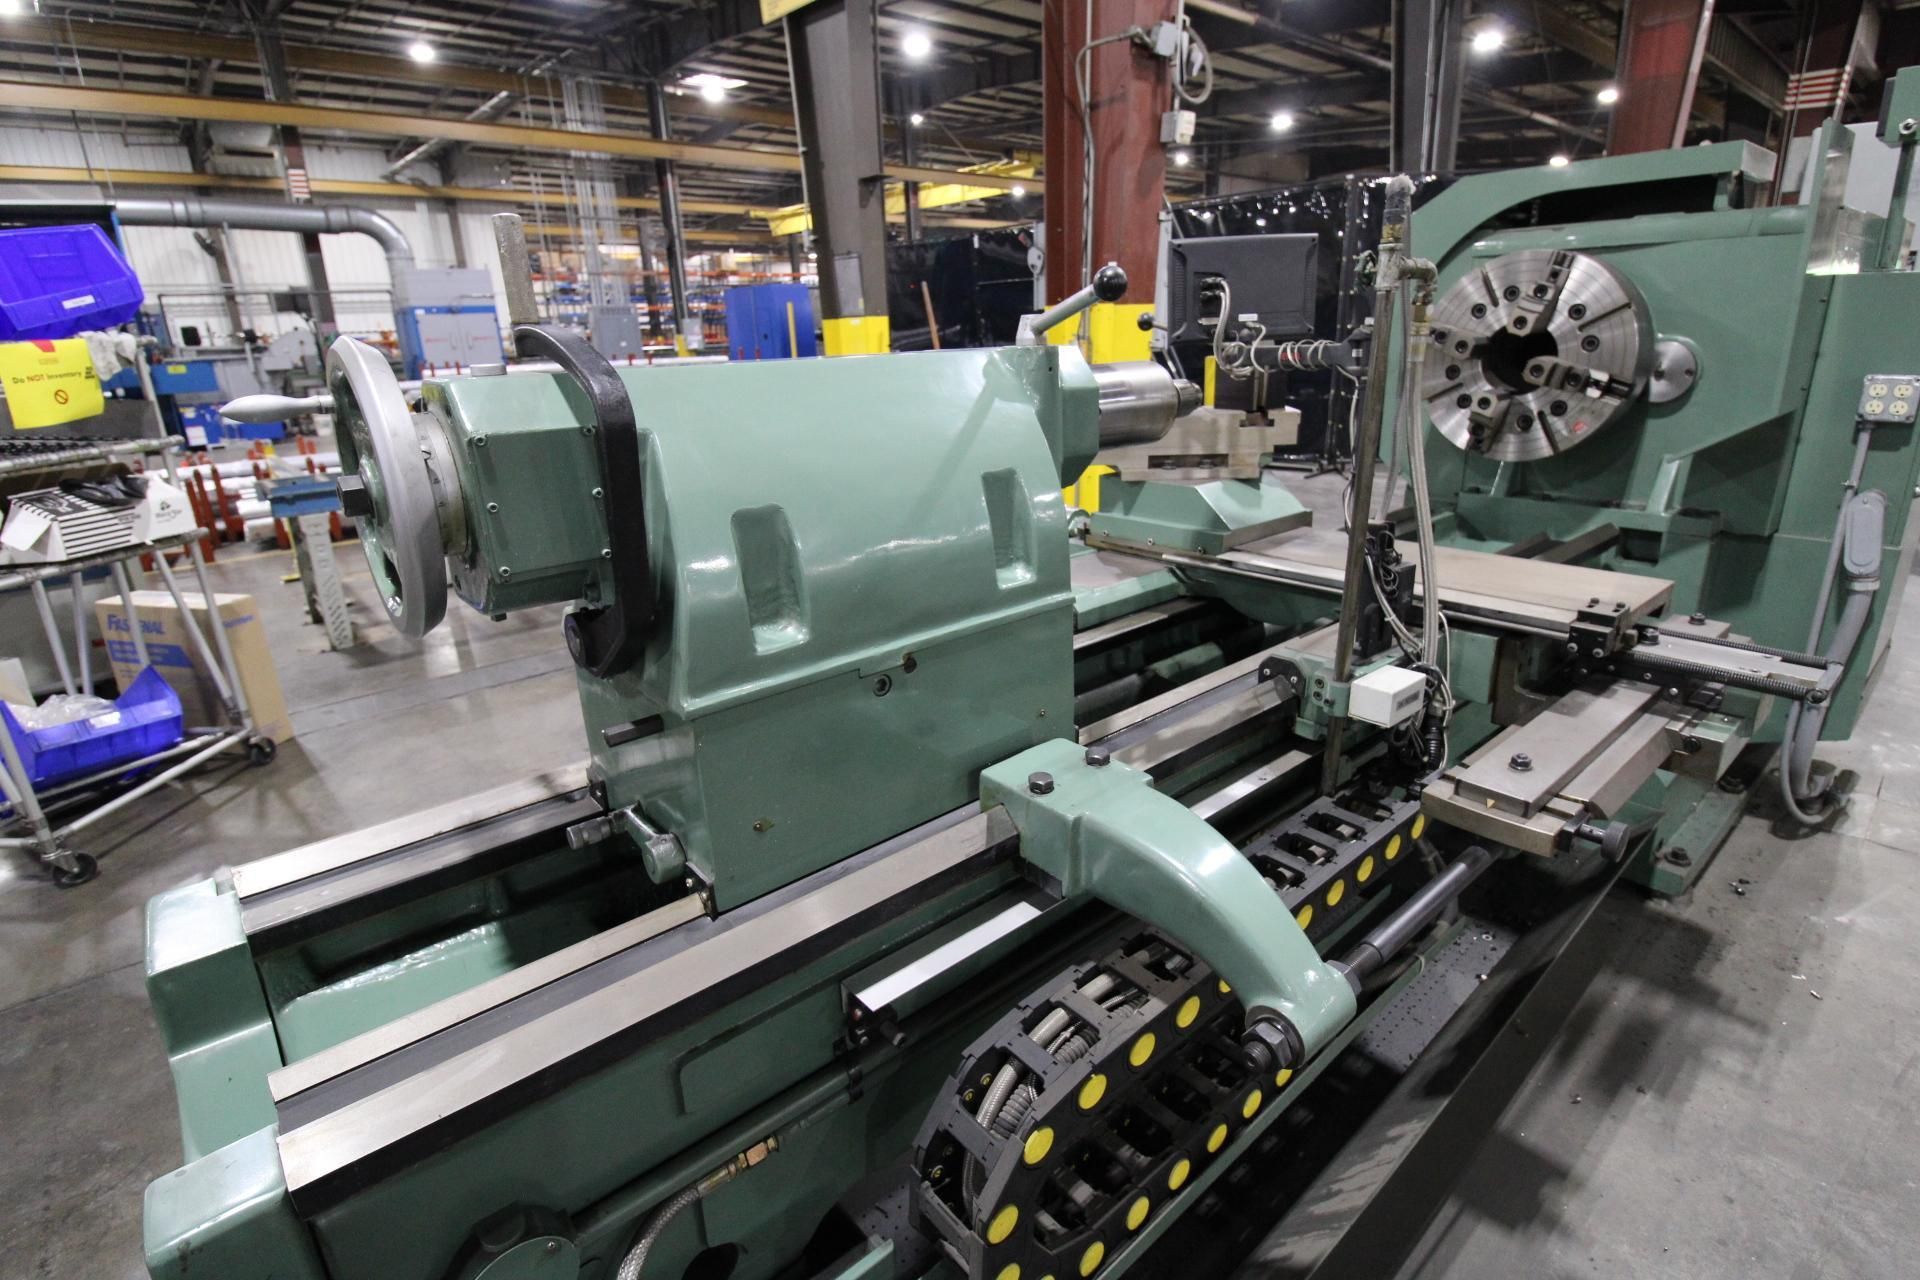 HOLLOW SPINDLE LATHE, KINGSTON HEAVY DUTY 34 HP-2000, new 2014, never used in production, 7-1/4" sp - Image 17 of 23